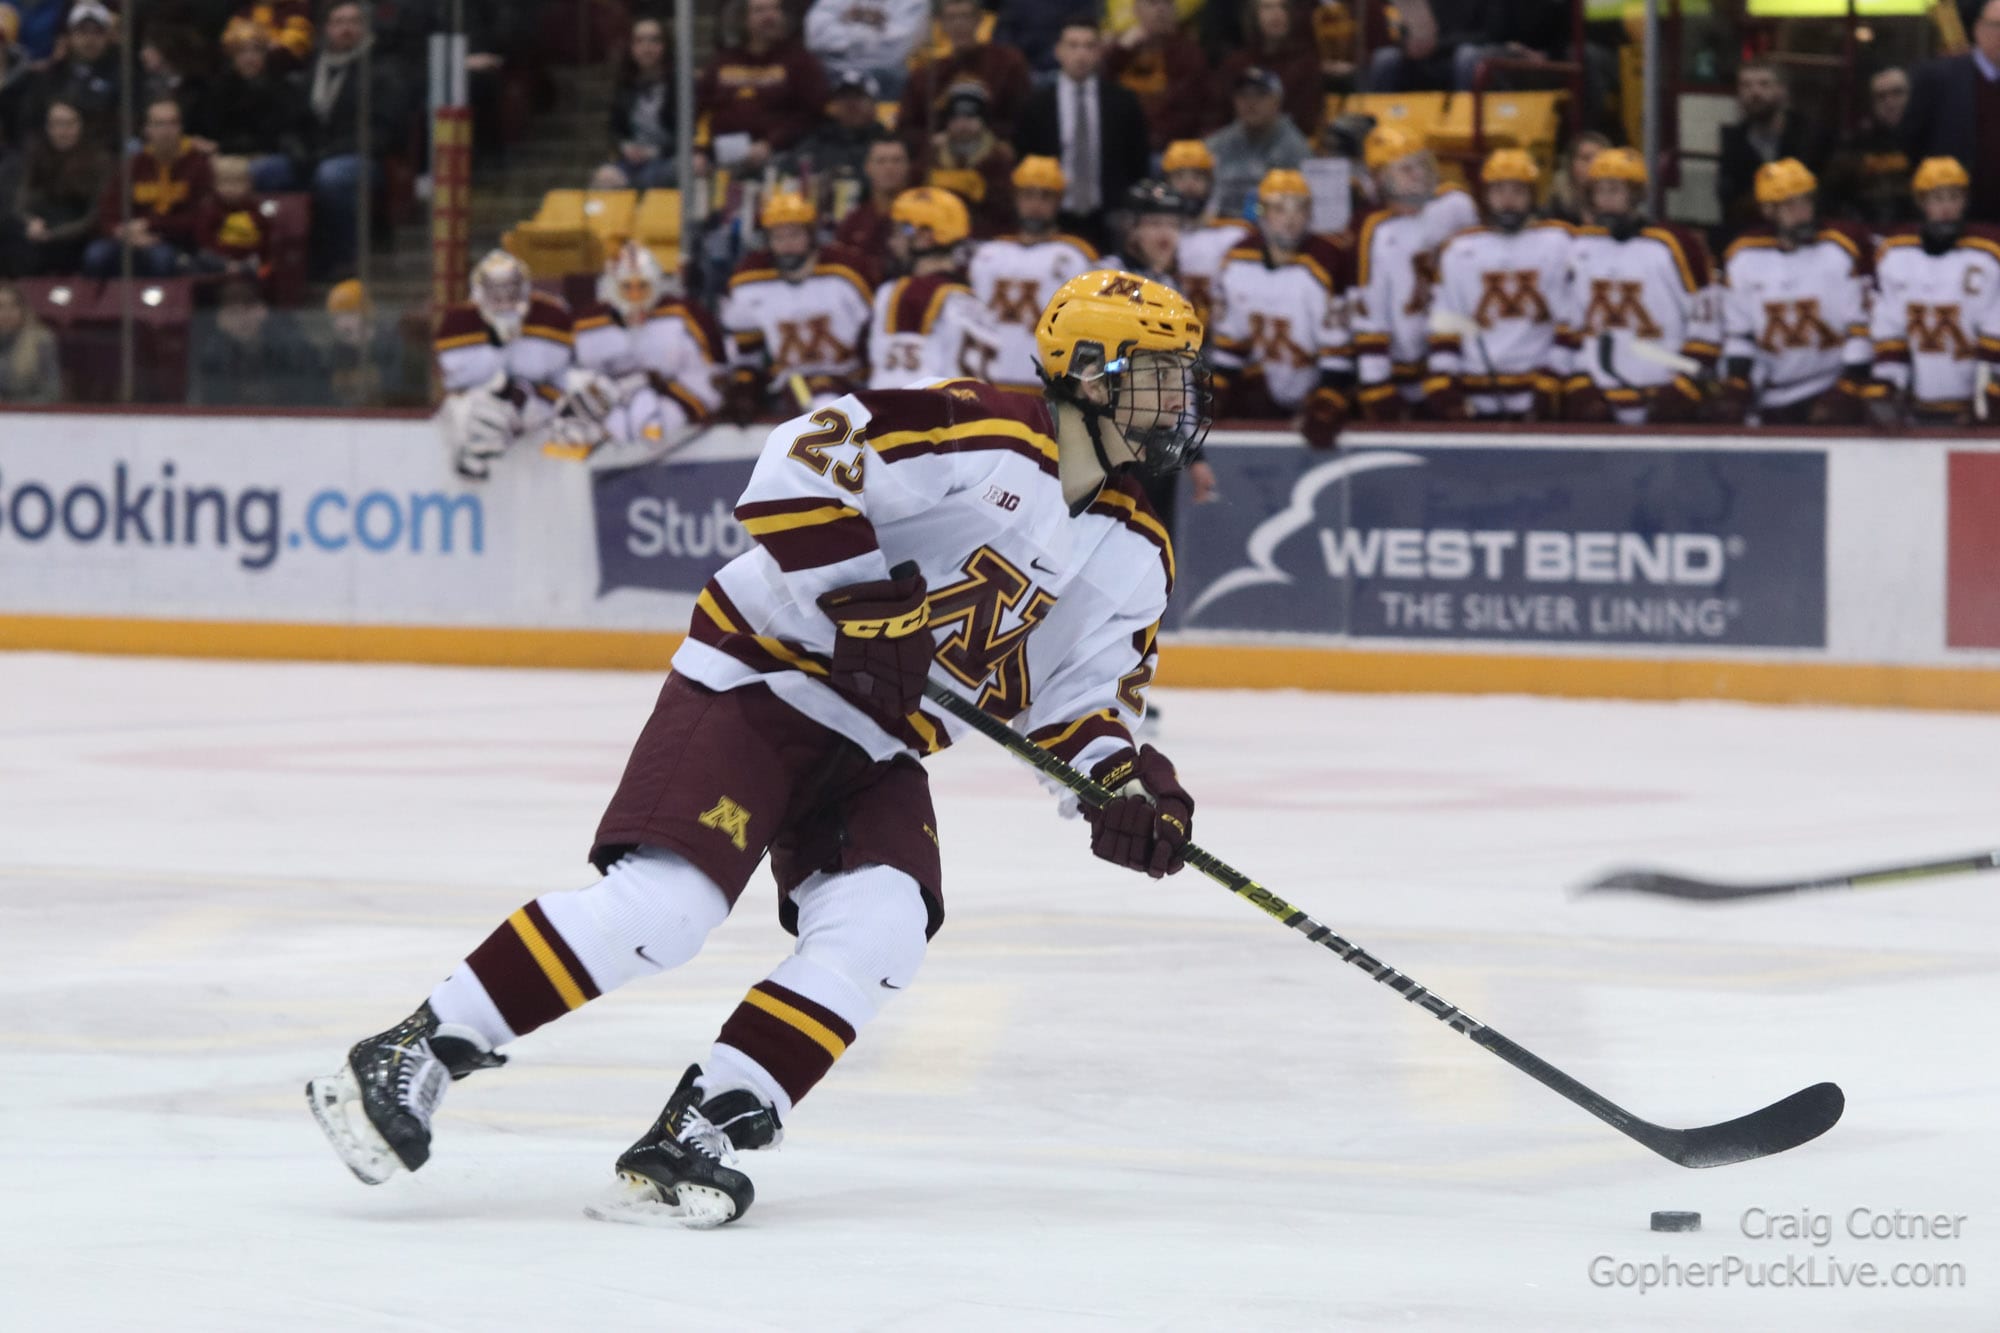 How Sweep It Is: Gophers Win x2 in State College; Extend Streak to 6